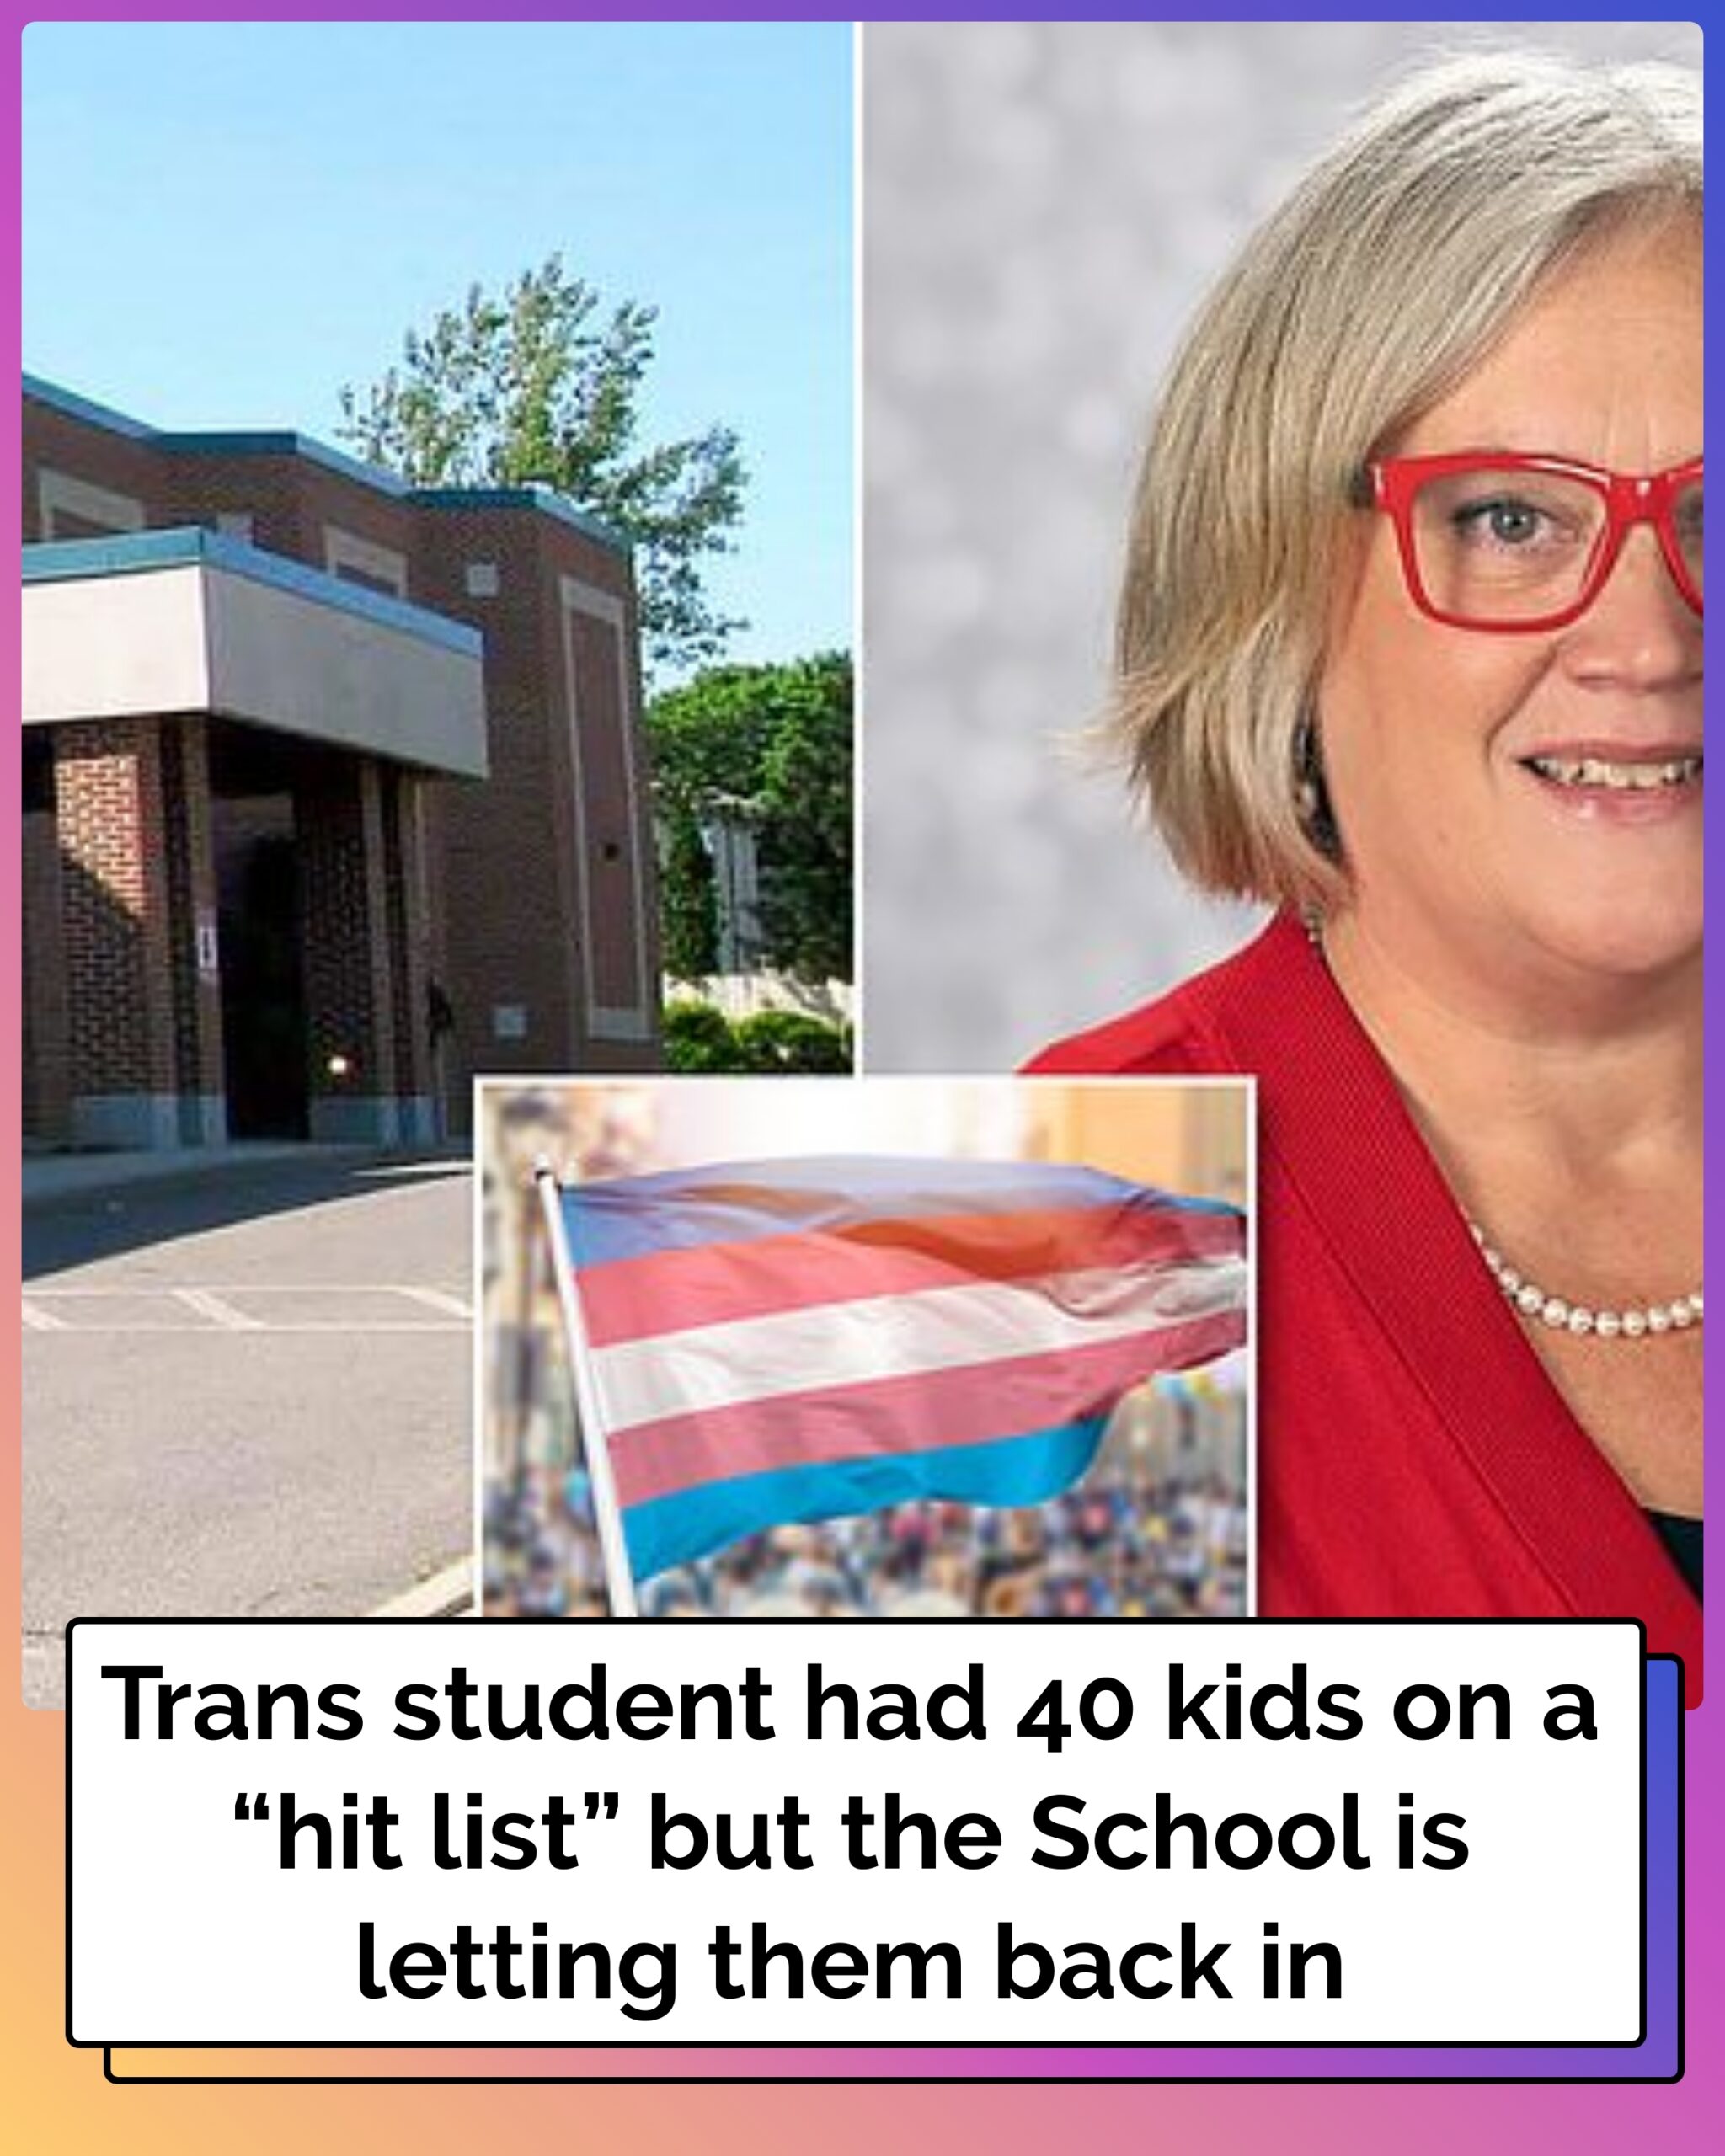 When Prioritizing ‘Wokeness’ Puts Kids at Risk: The Chilling Tale of a Trans Student’s Hit List